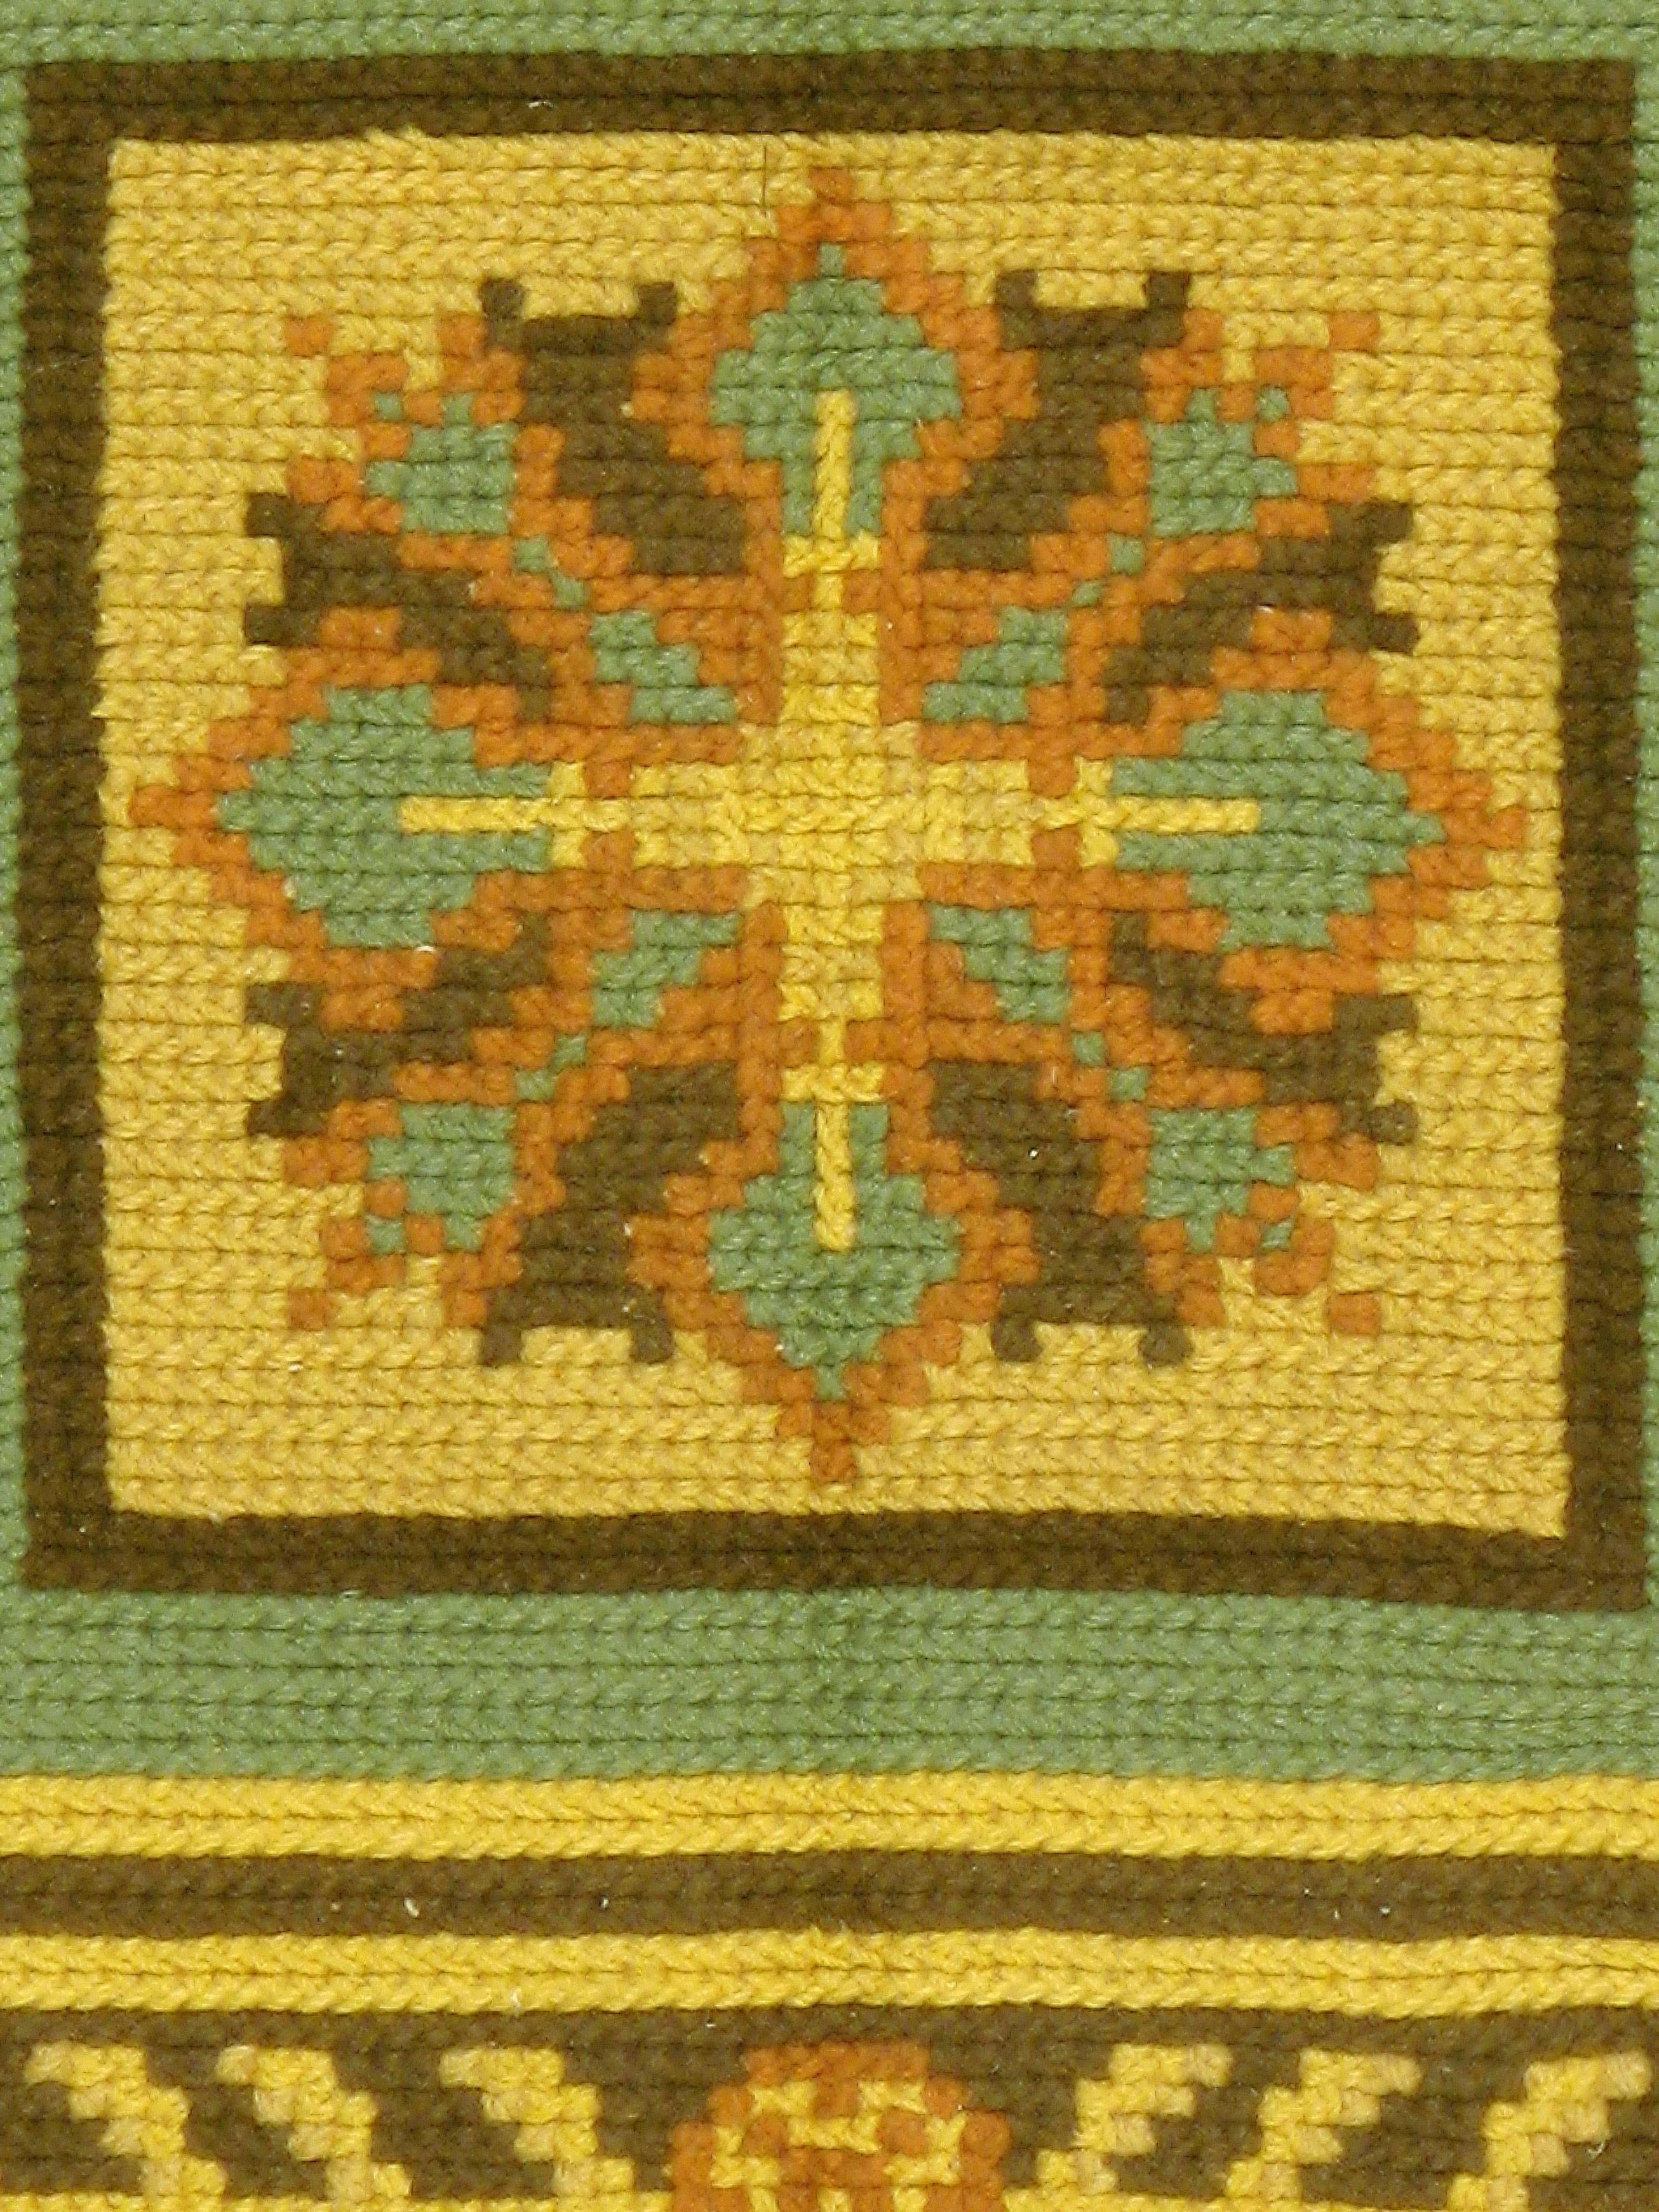 A vintage Portuguese needlepoint carpet from the mid-20th century.